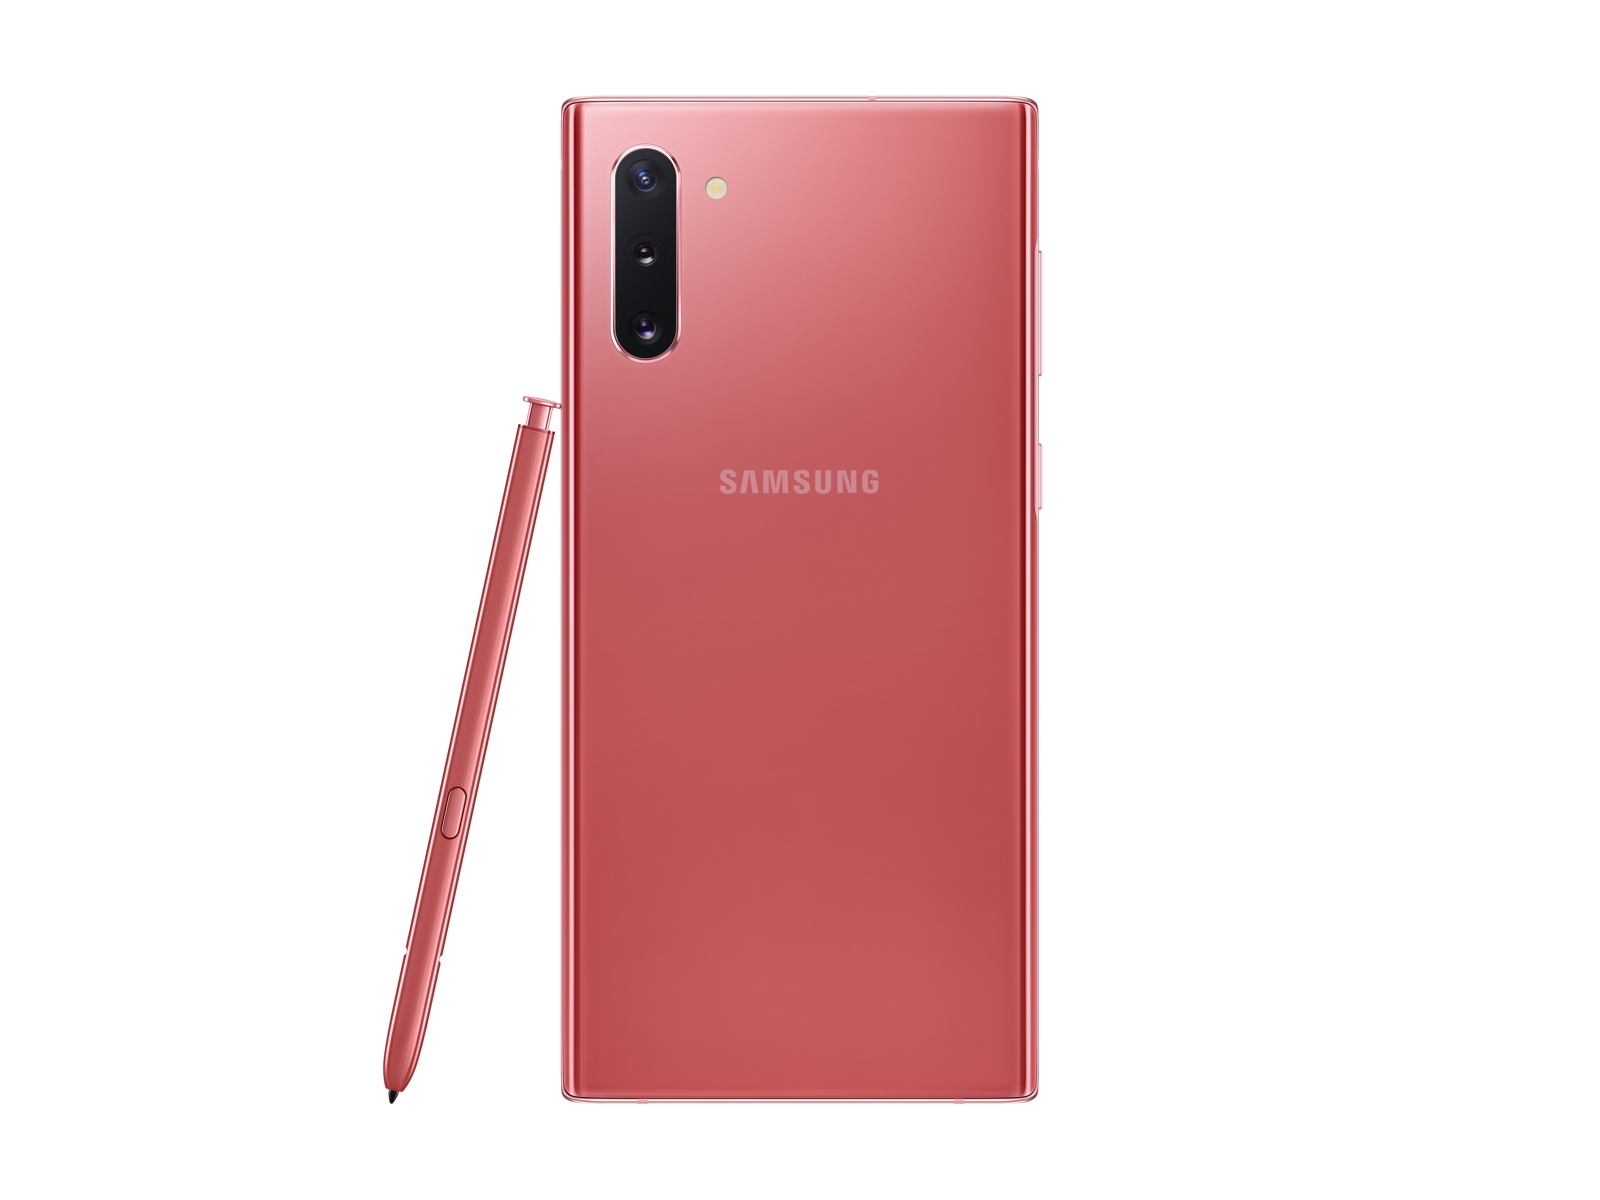 Samsung Galaxy Note 10 Lite review: Lite on pocket, but not on performance